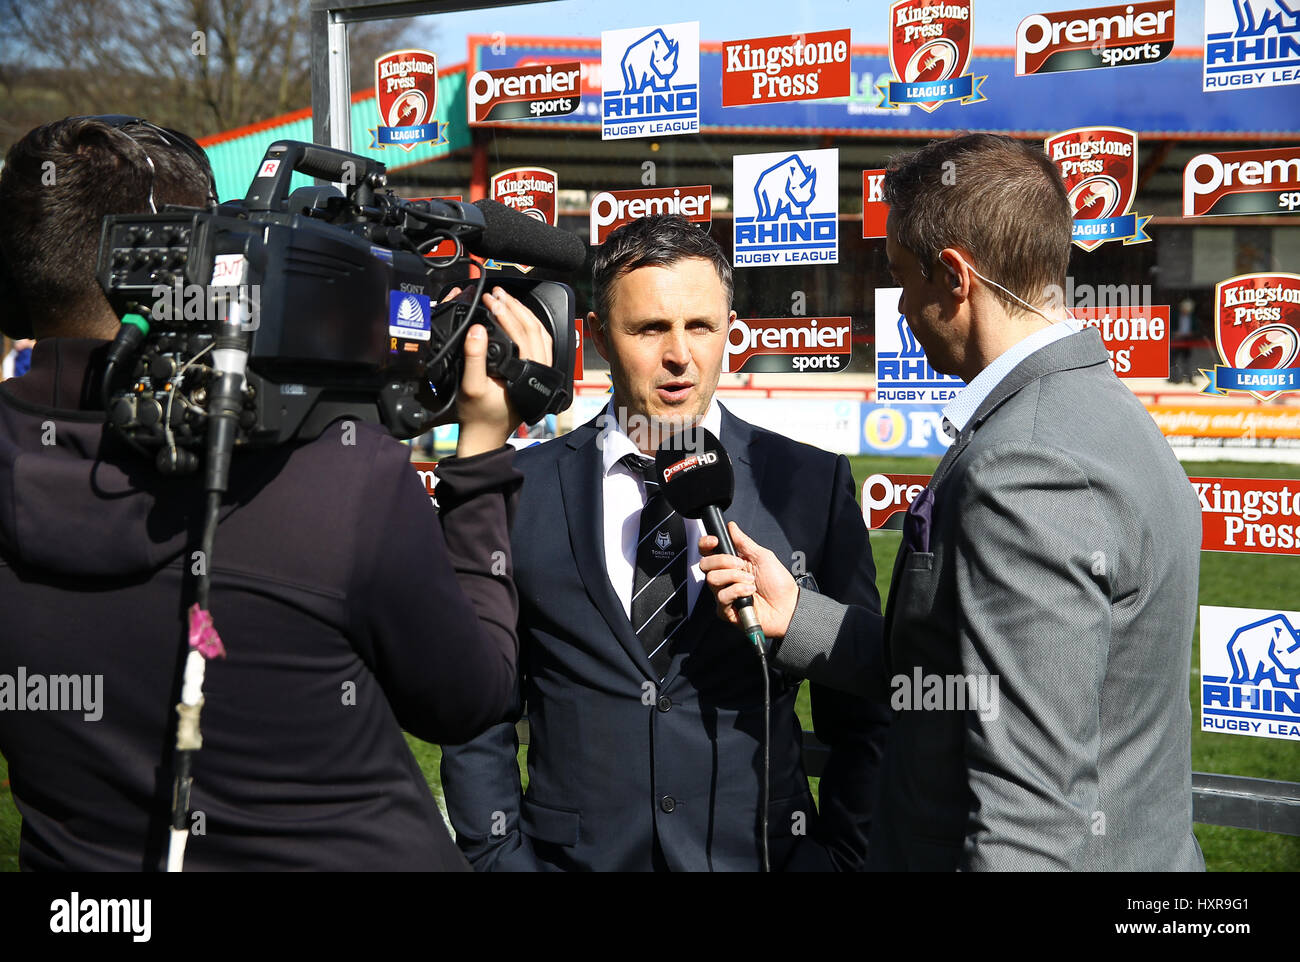 Paul Rowley Coach of Toronto Wolfpack Rugby League chats to Premier Sports TV ahead of Keighley Cougars vs Toronto Wolfpack during the Kingstone Press League One clash at Cougar Park, Keighley ,